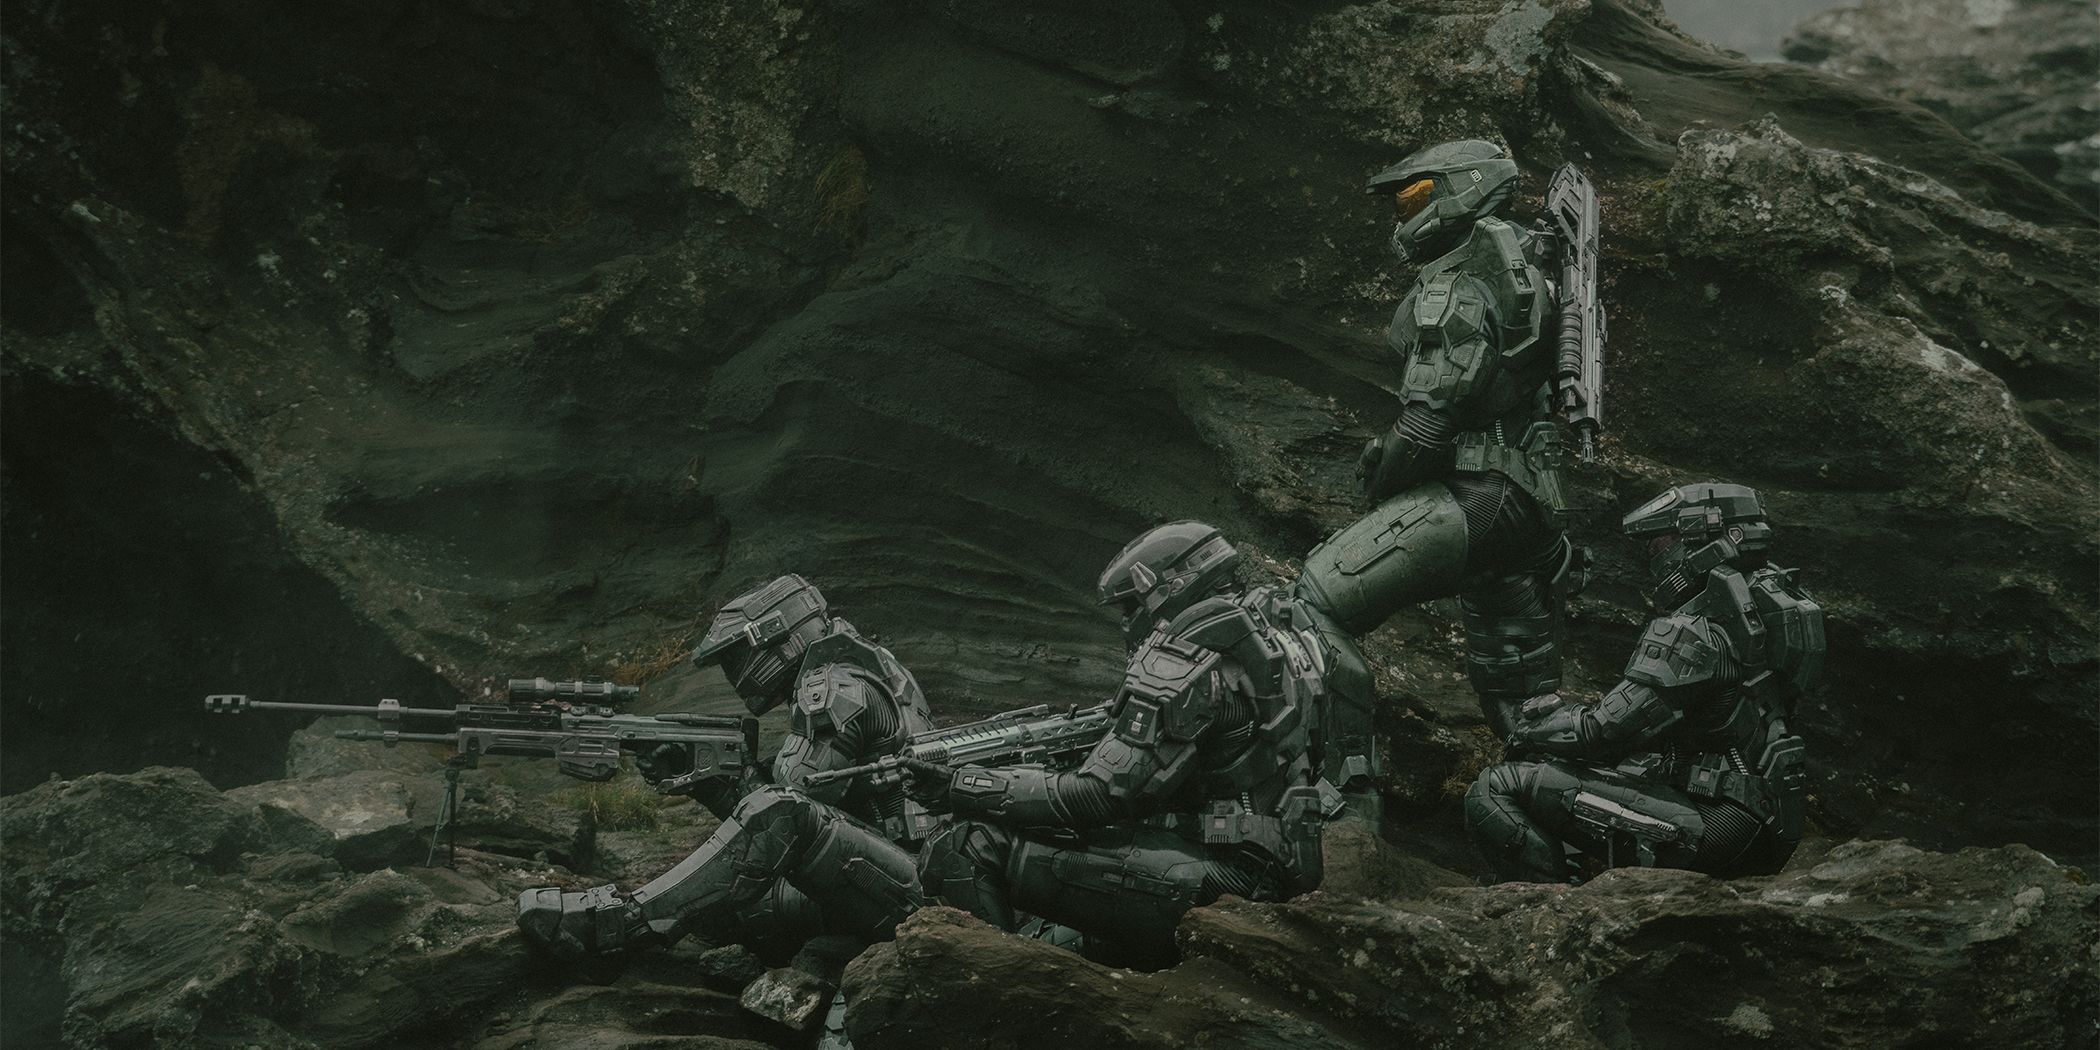 Spartans gathered on a rocky terrain, aiming weapons in Halo Season 2